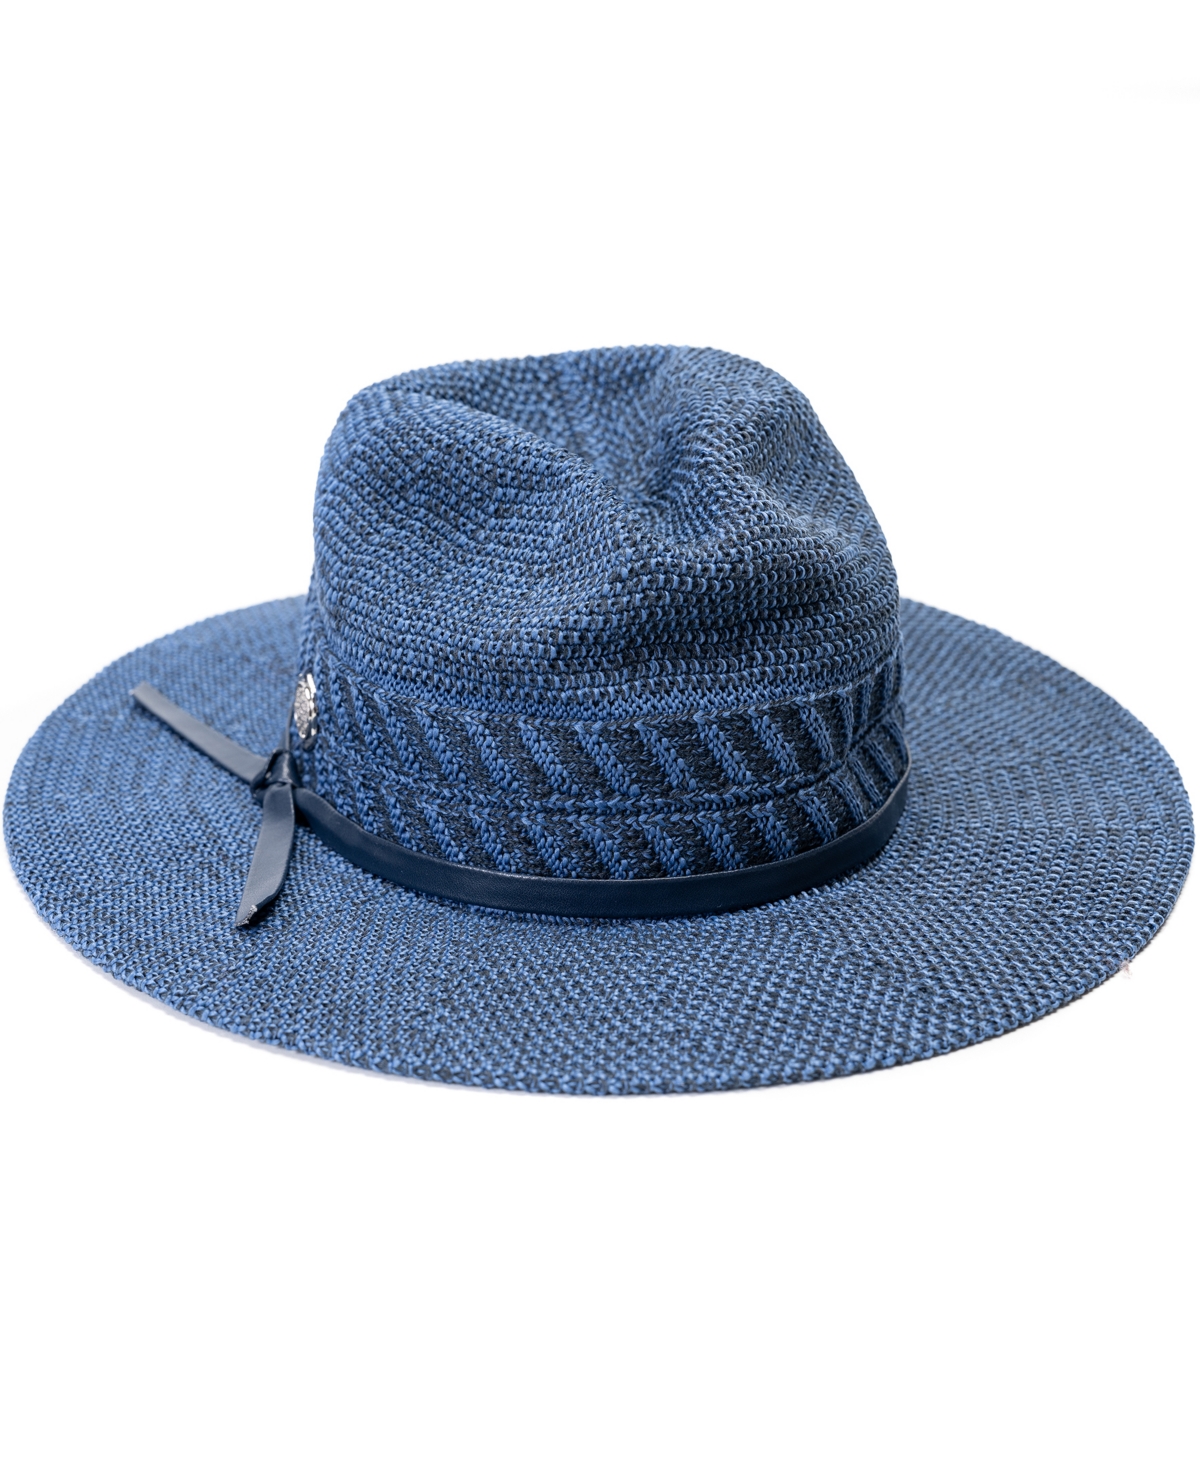 Packable Panama with Tie Band - Blue